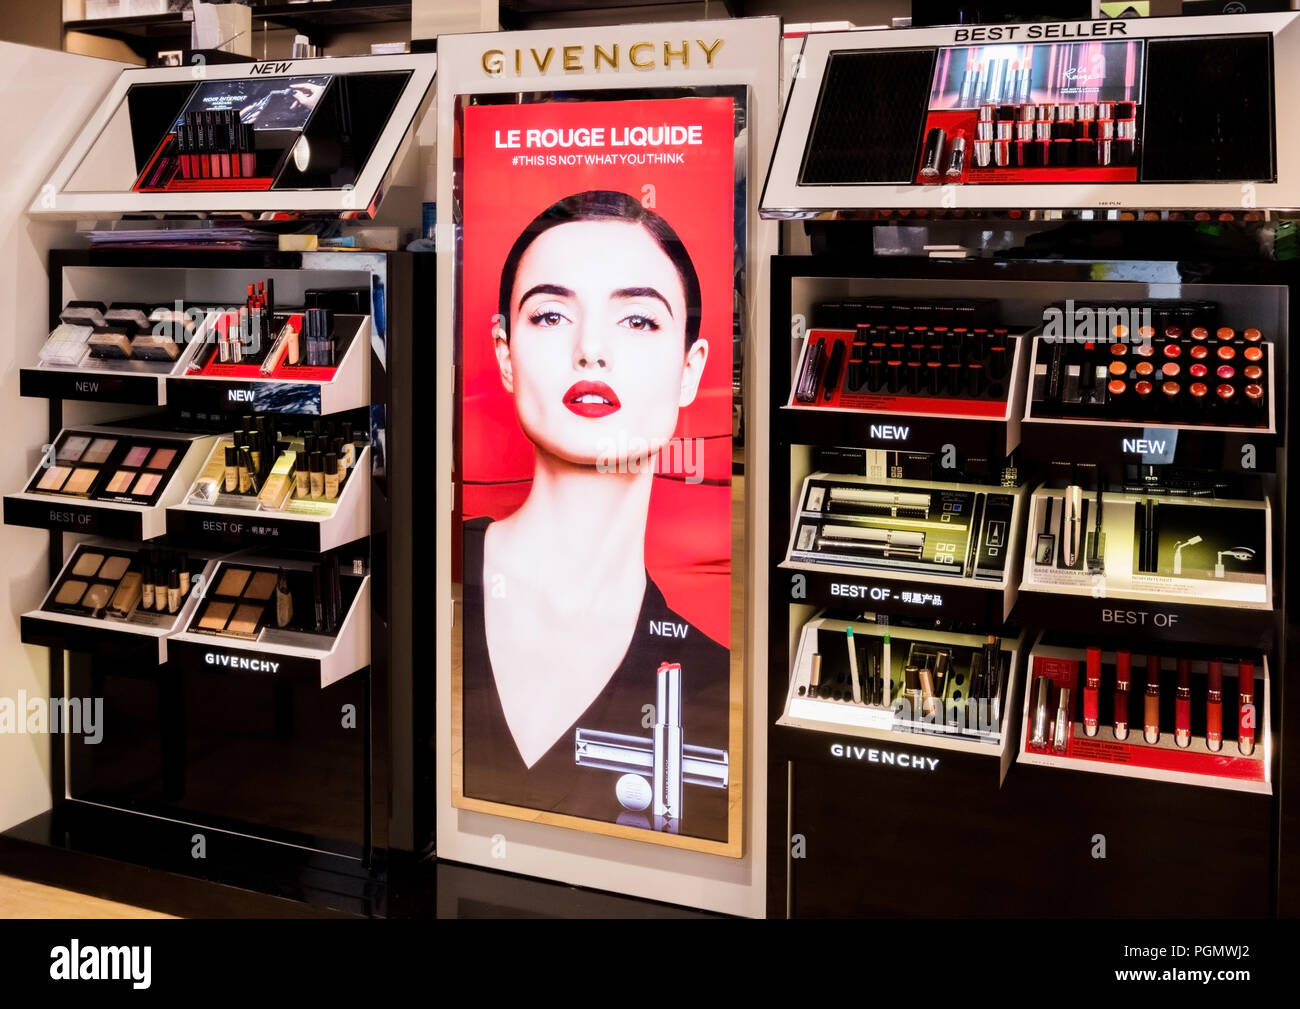 GIVENCHY Store @ Central Embassy